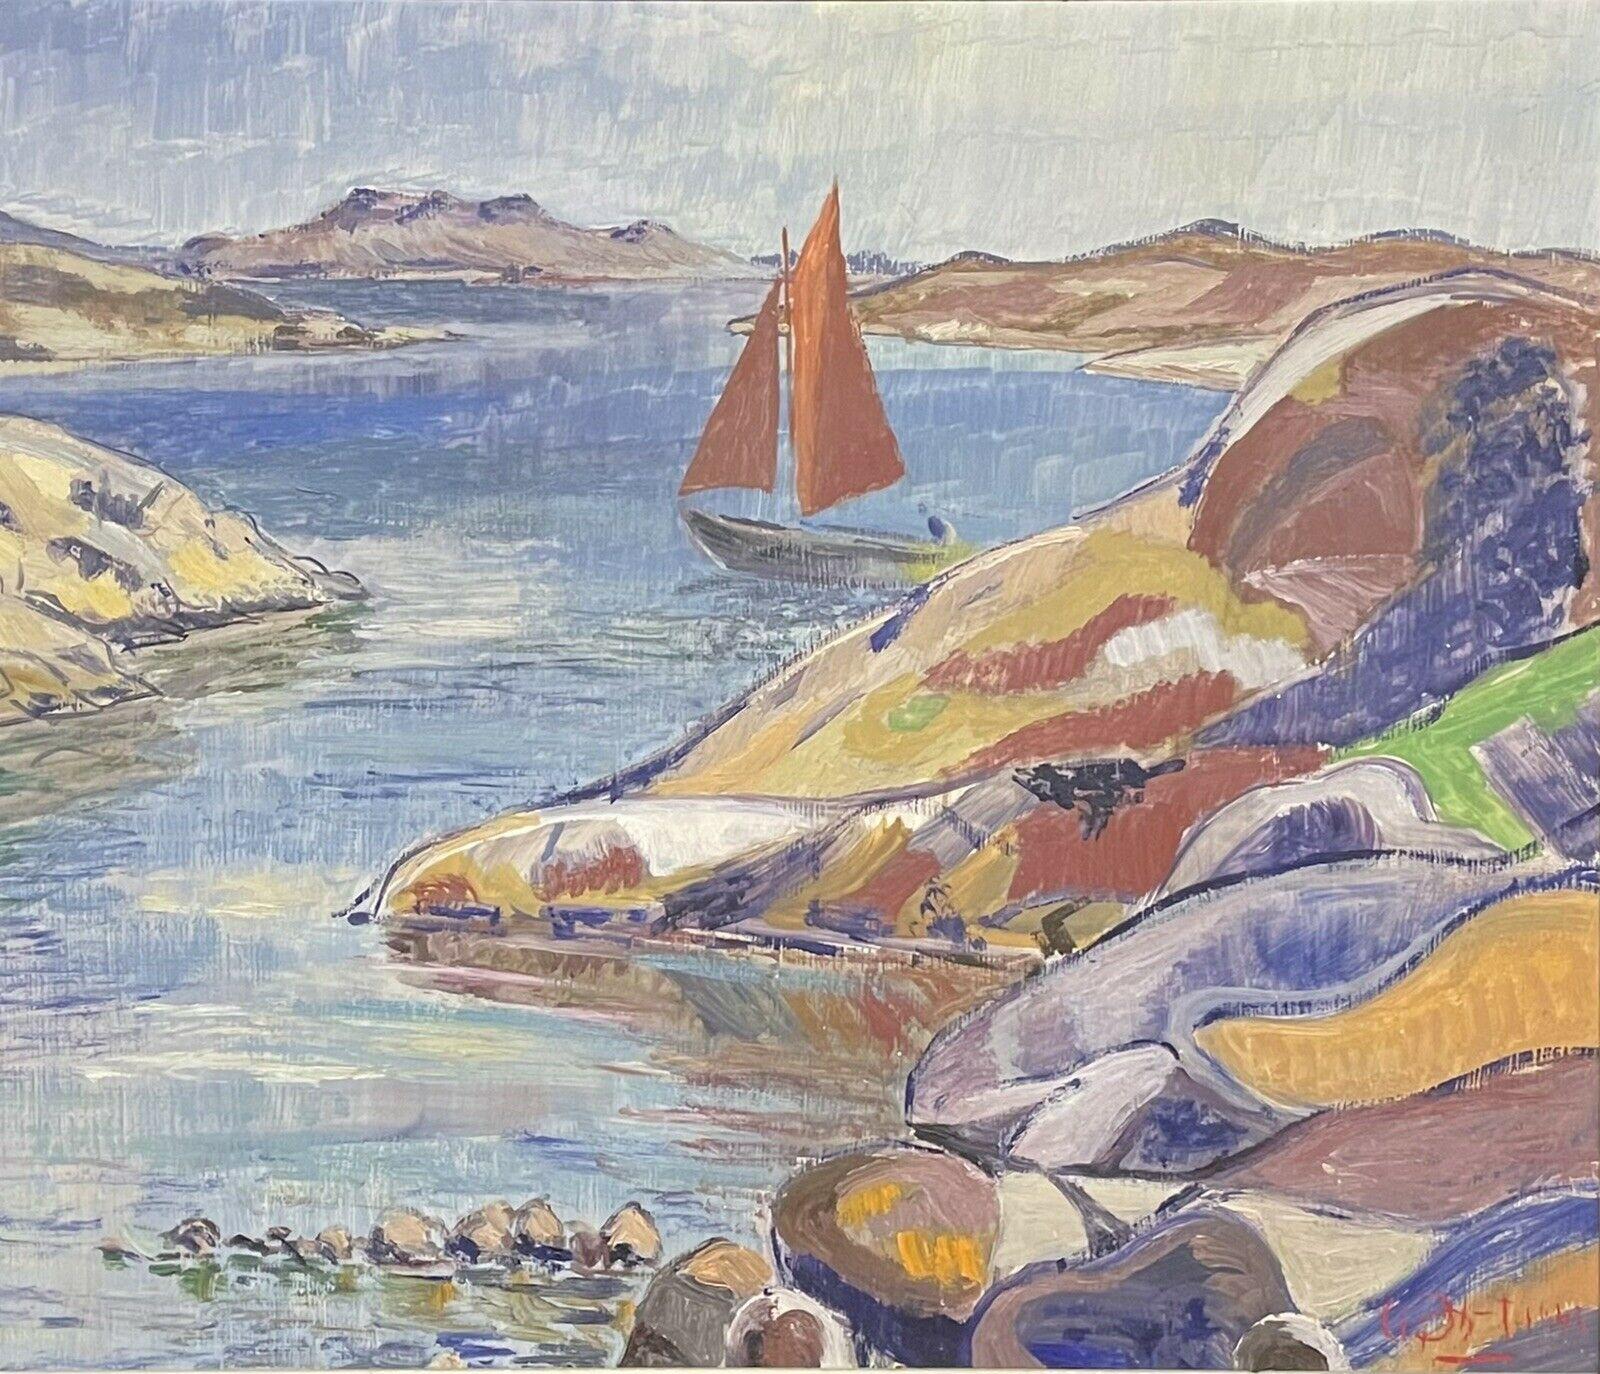 1940's FRENCH SIGNED POST-IMPRESSIONIST/ FAUVIST OIL - BOATS OFF ROCKY COASTLINE